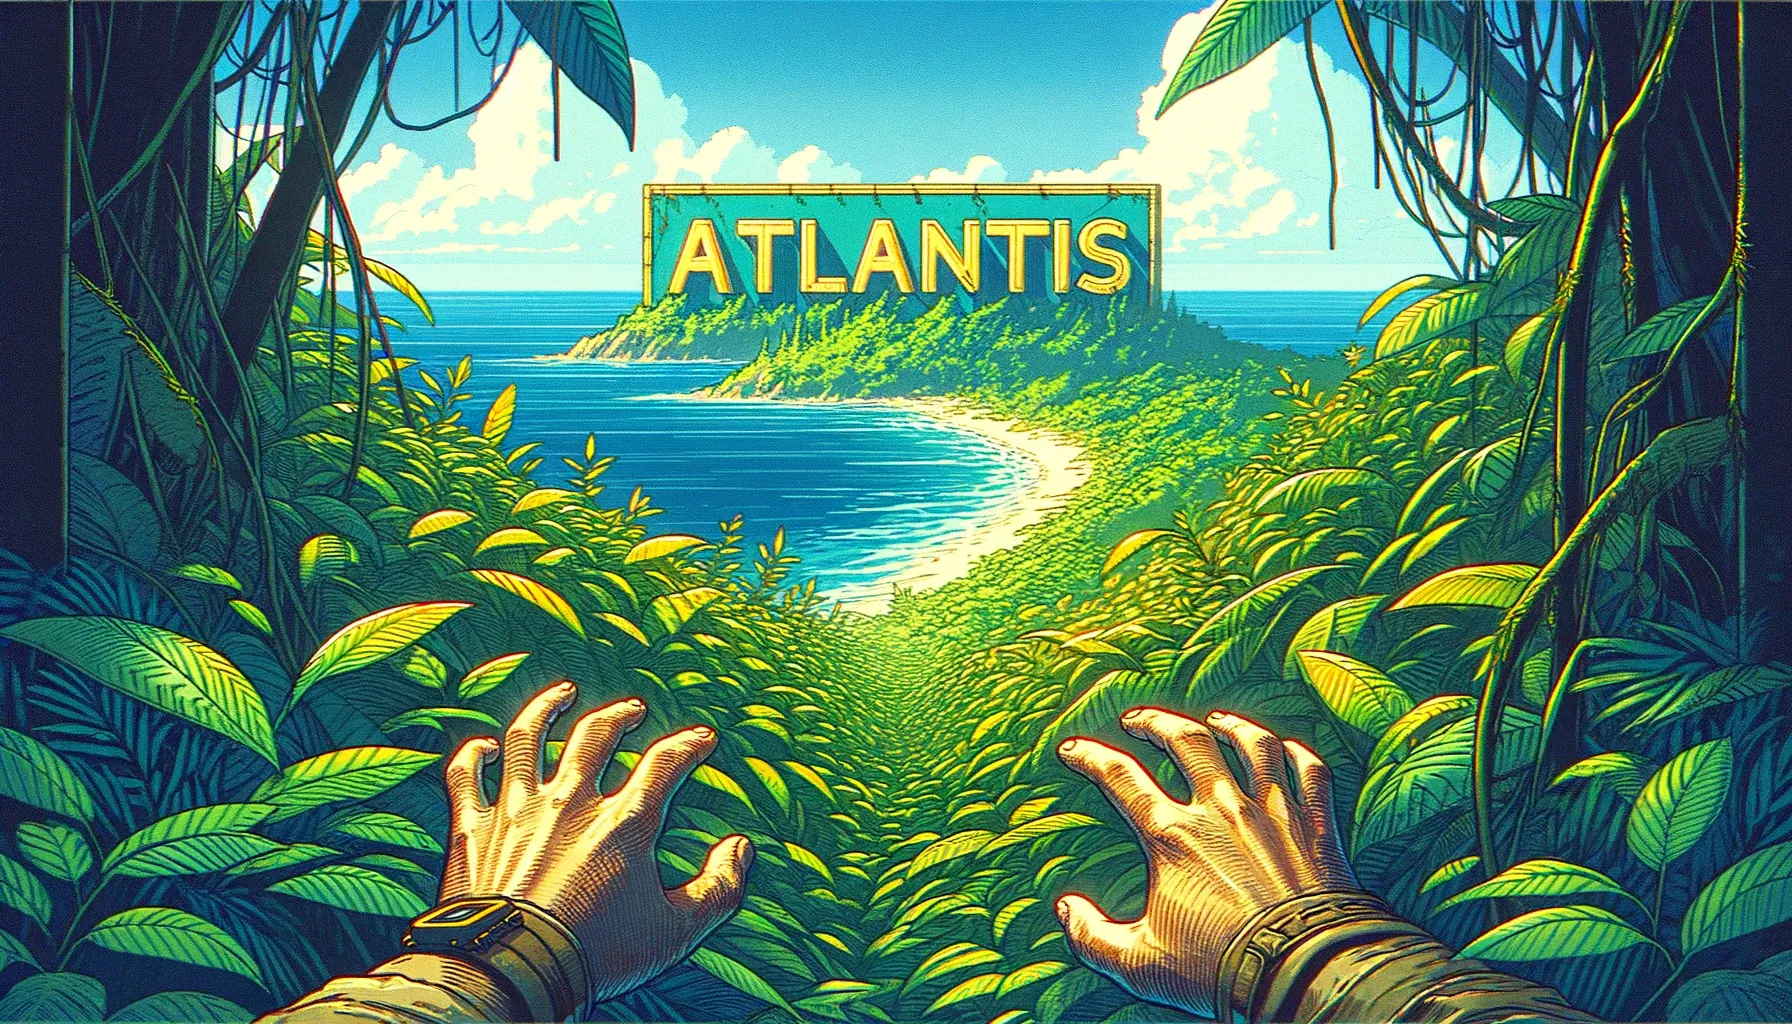 journey to atlantis, illustration with forest, grass and atlantis name in the background